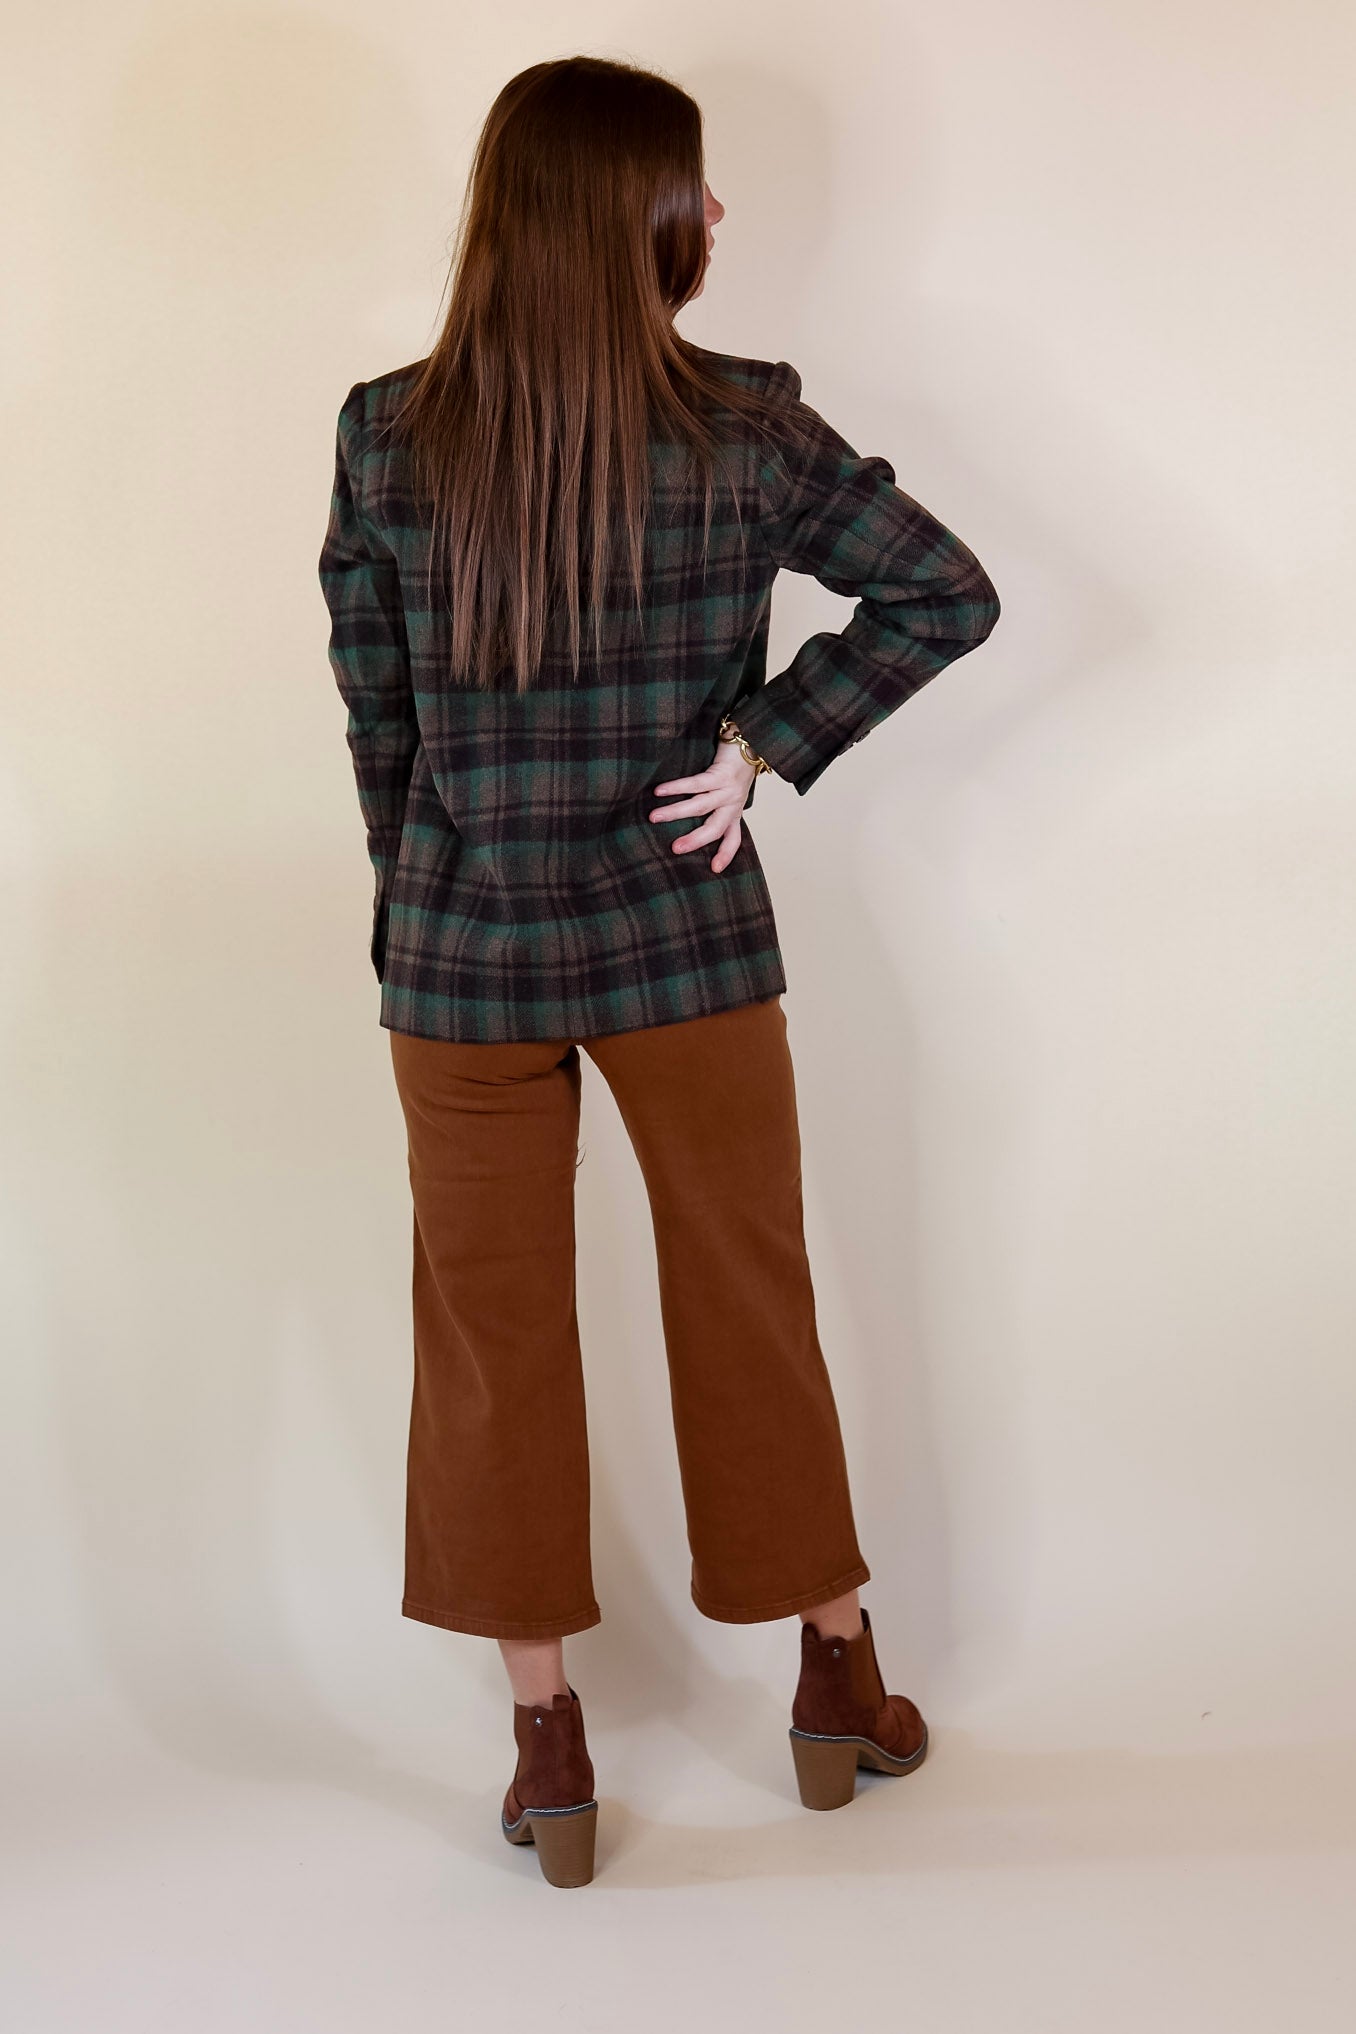 Ready For Anything Plaid Blazer in Brown and Green - Giddy Up Glamour Boutique